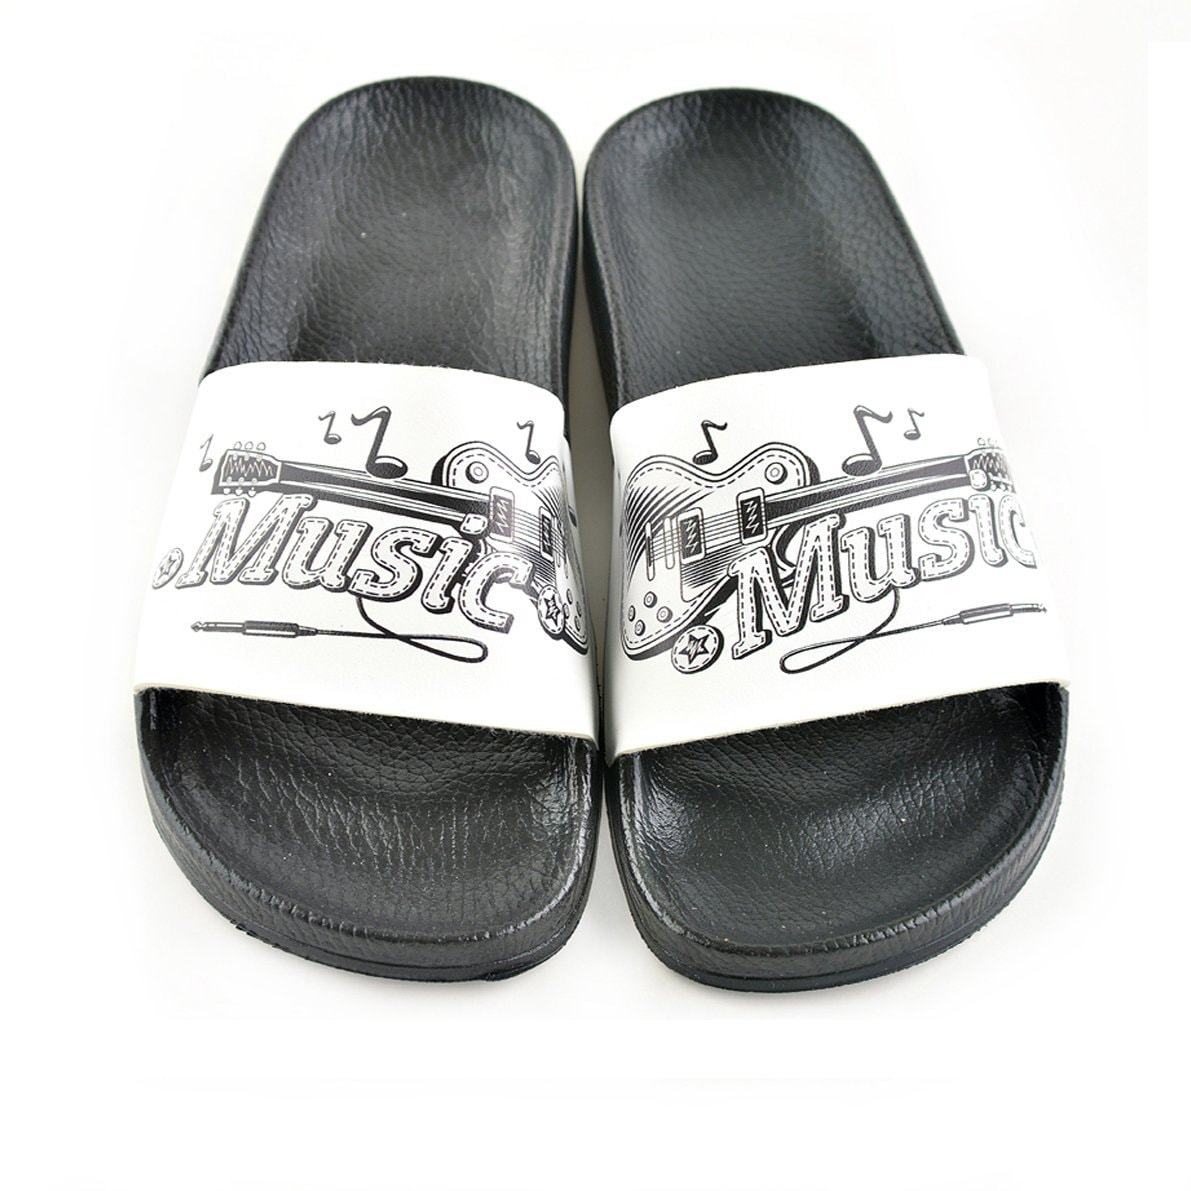 Black and White Colored Electronic Giutar and Music Written Patterned Sandal - CAP201